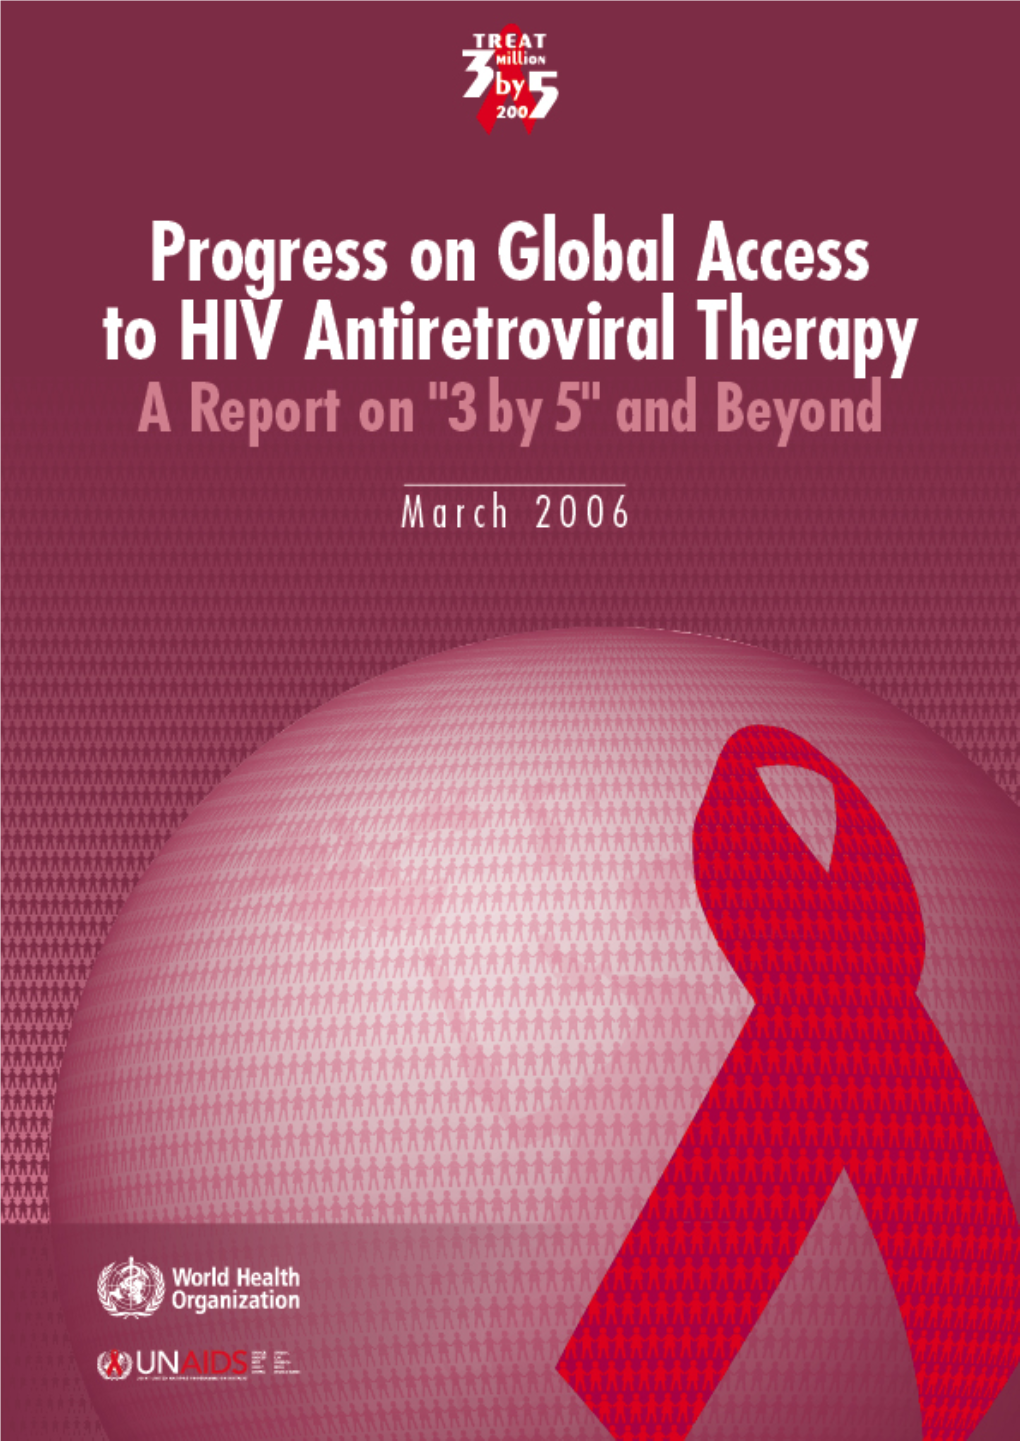 Progress on Global Access to HIV Antiretroviral Therapy: a Report on “3 by 5” and Beyond, March 2006